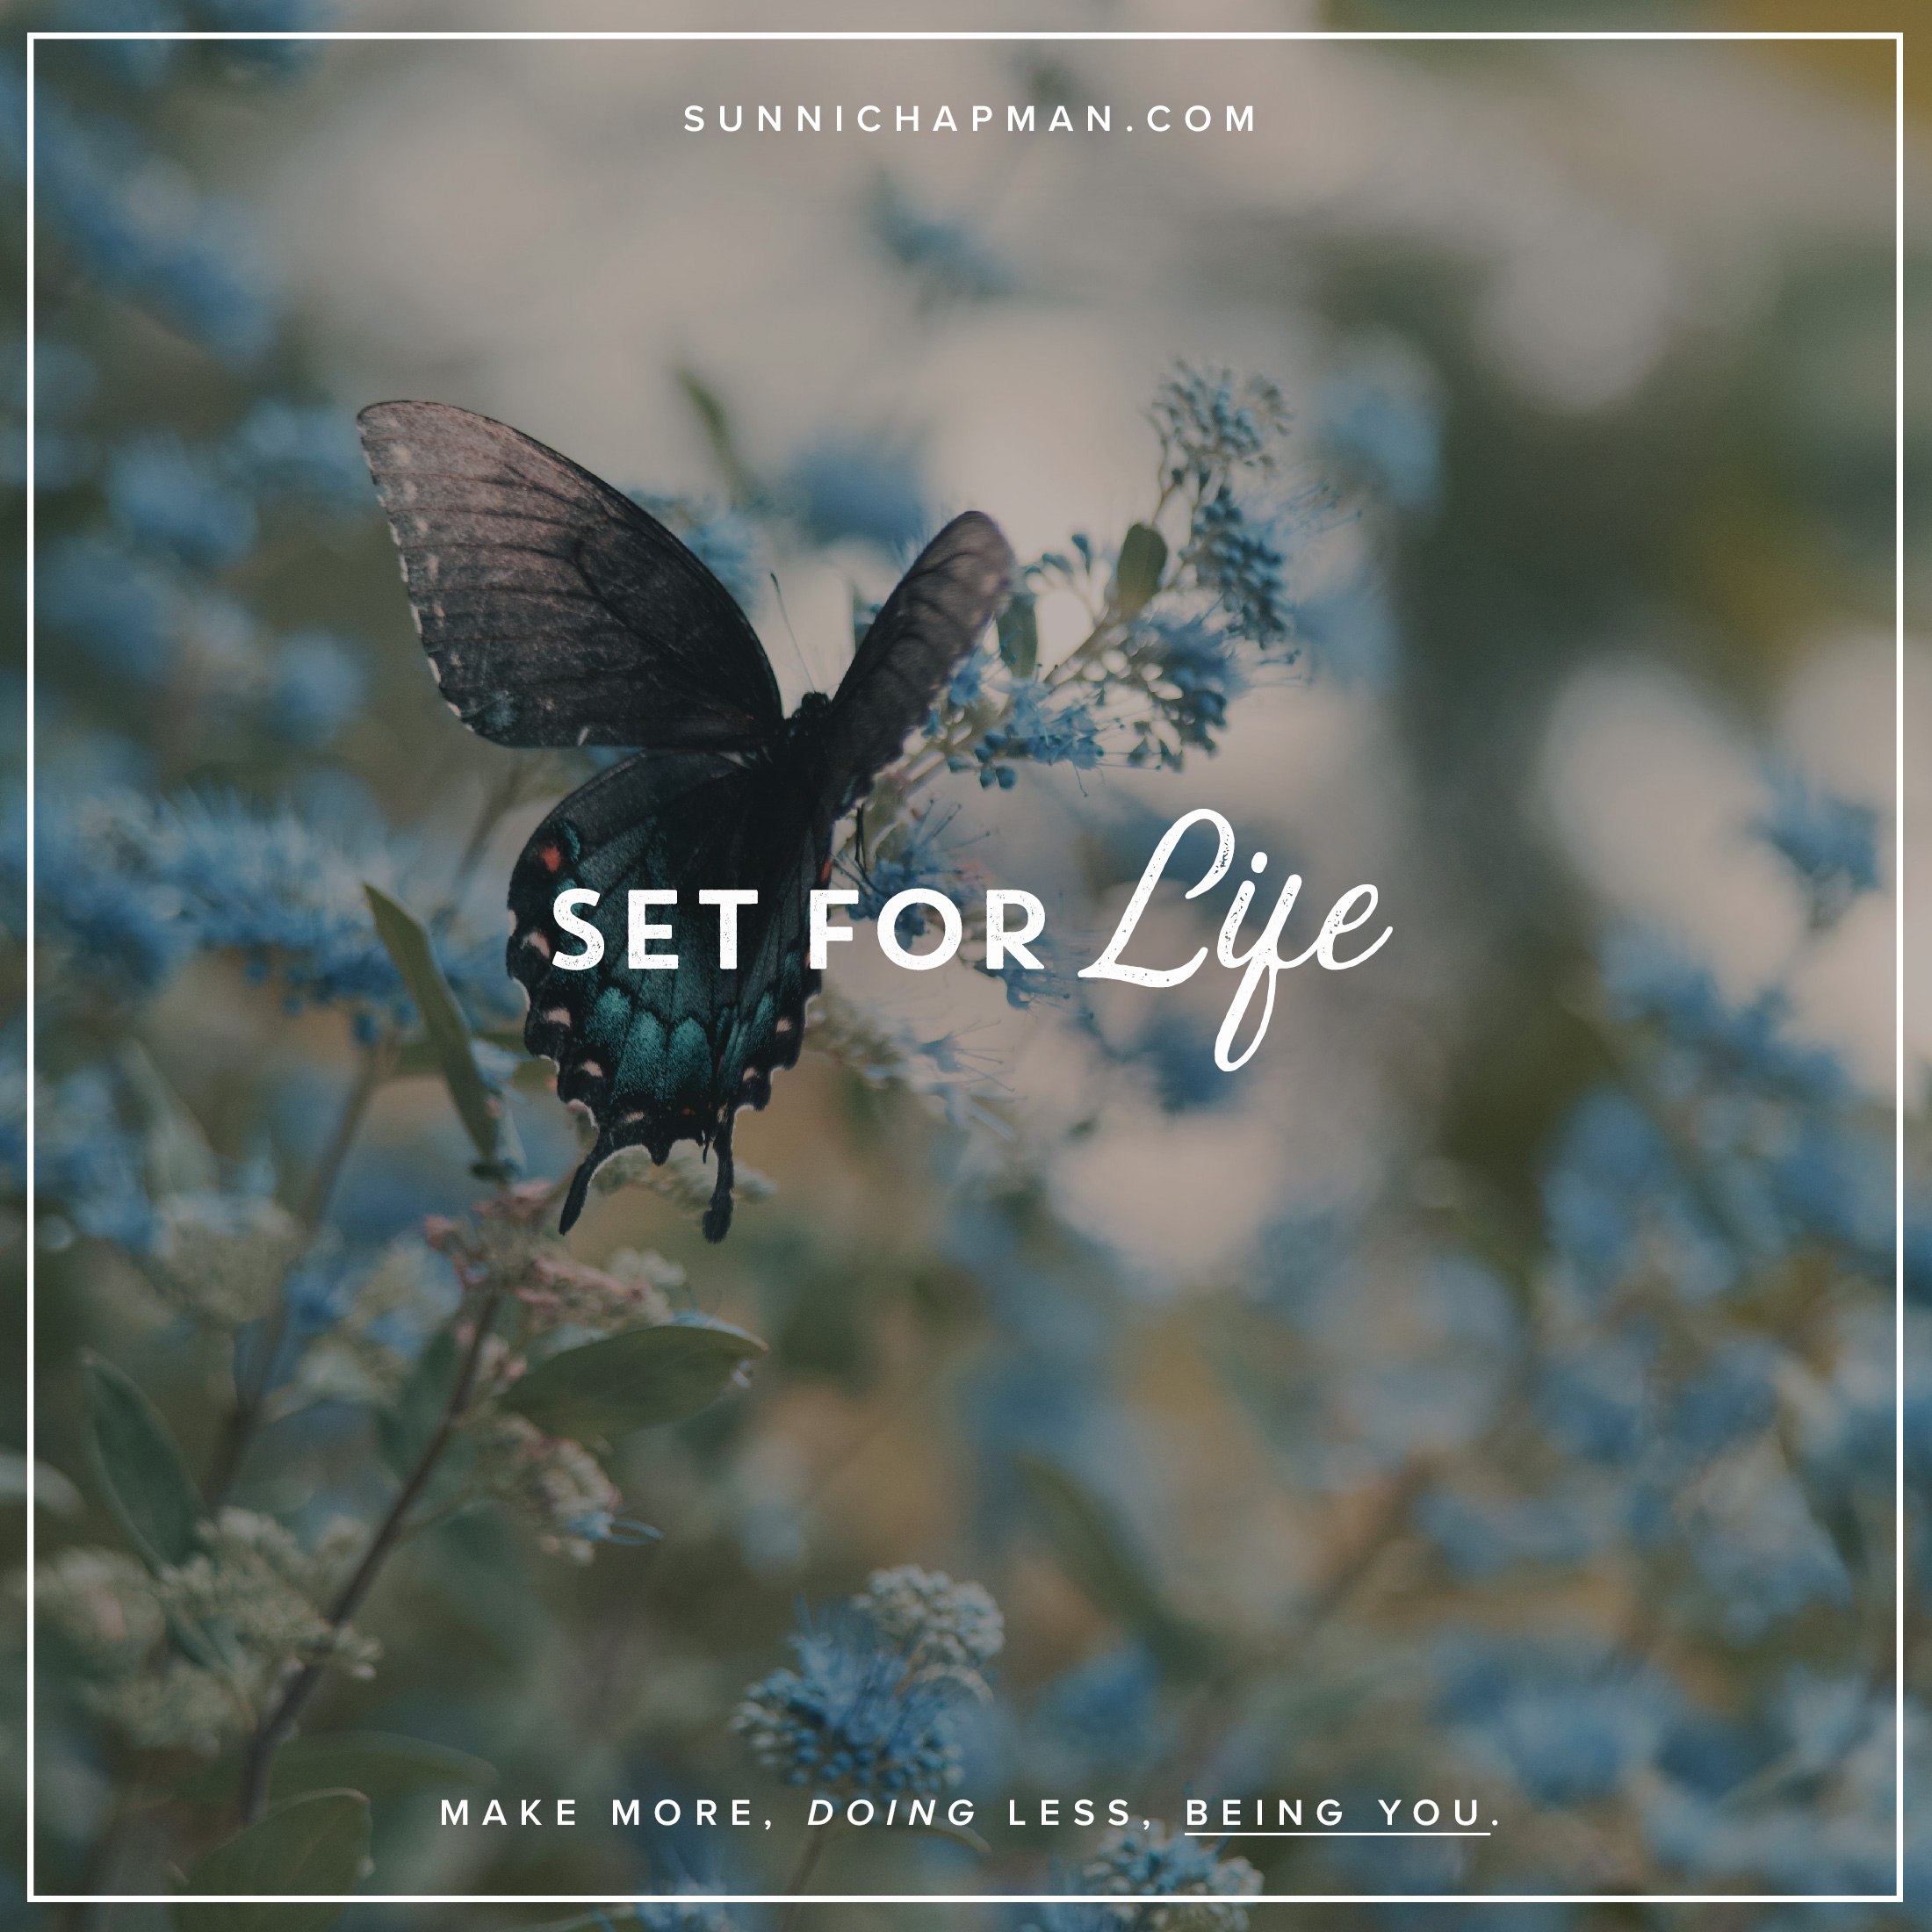 Butterfly on a beautiful blue flower and text over: Set For Life